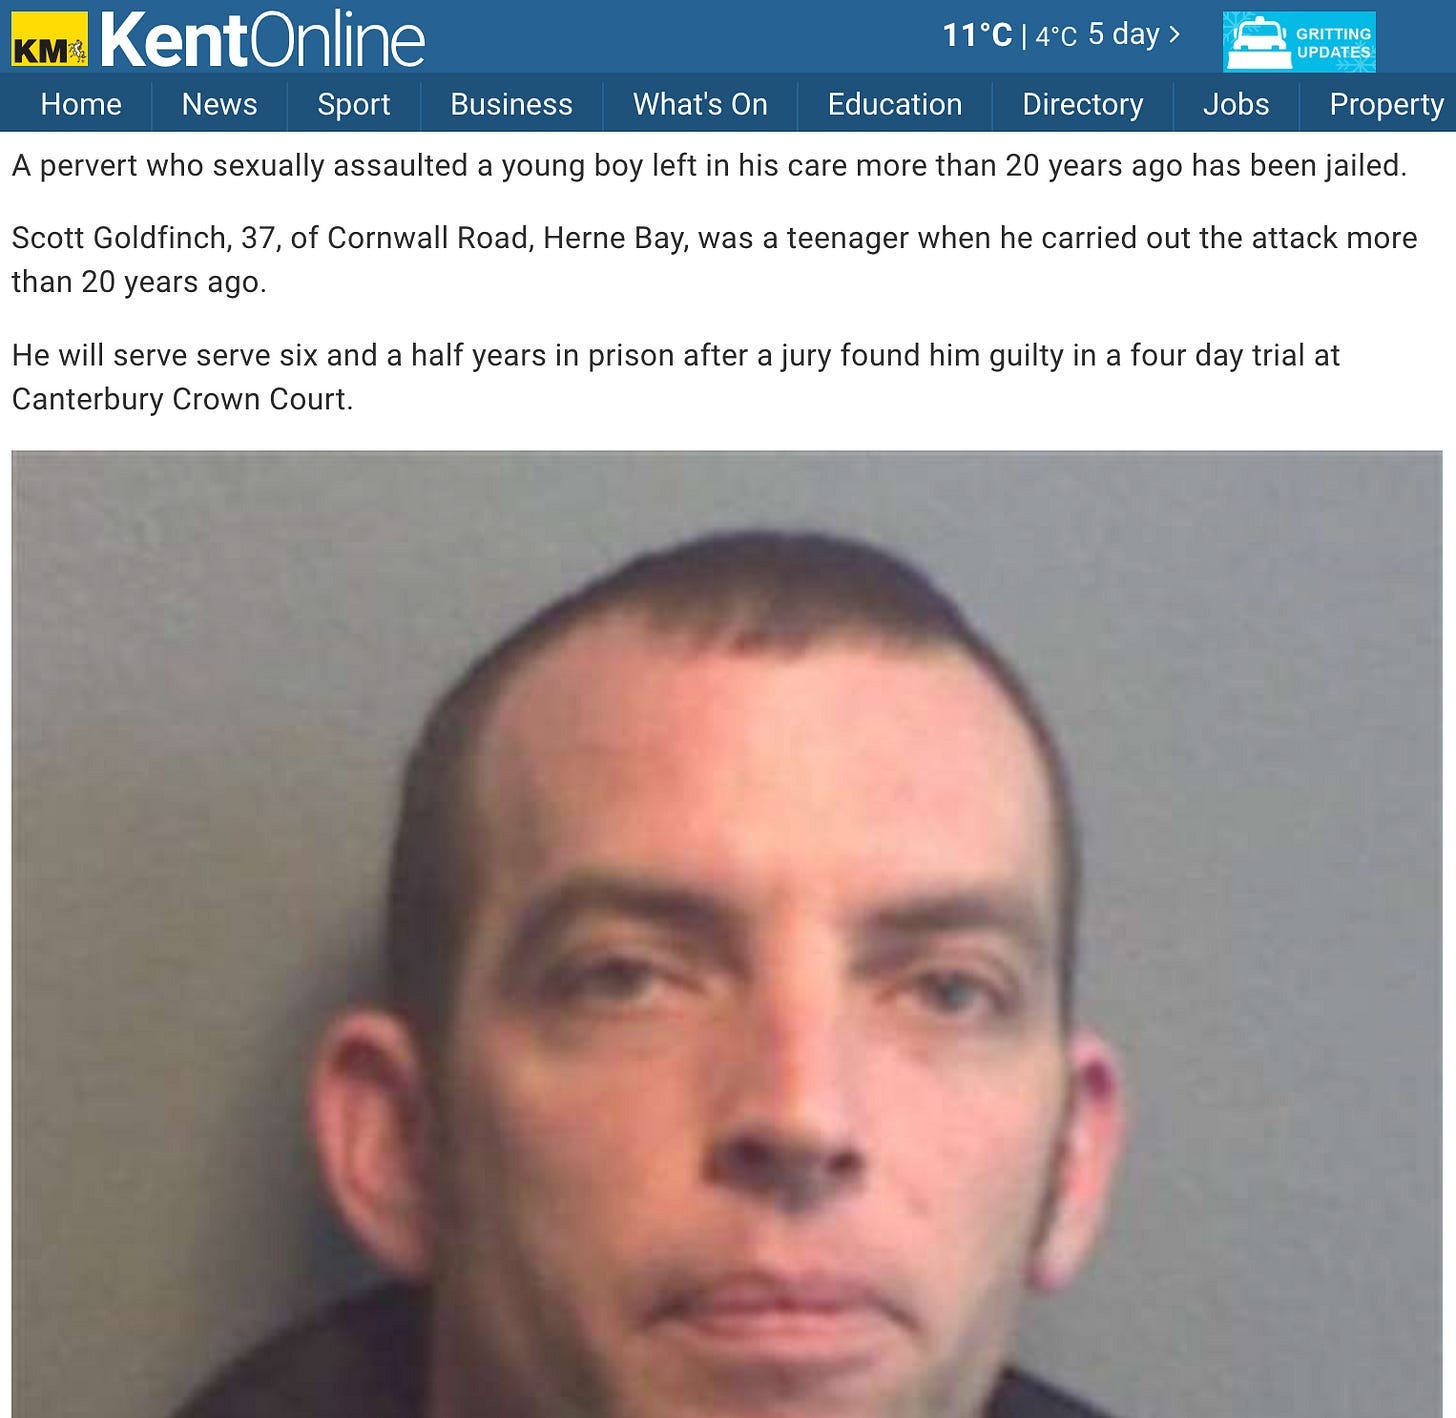 "A pervert who sexually assaulted a young boy left in his care more than 20 years ago has been jailed.  Scott Goldfinch, 37, of Cornwall Road, Herne Bay, was a teenager when he carried out the attack more than 20 years ago.  He will serve serve six and a half years in prison after a jury found him guilty in a four day trial at Canterbury Crown Court."